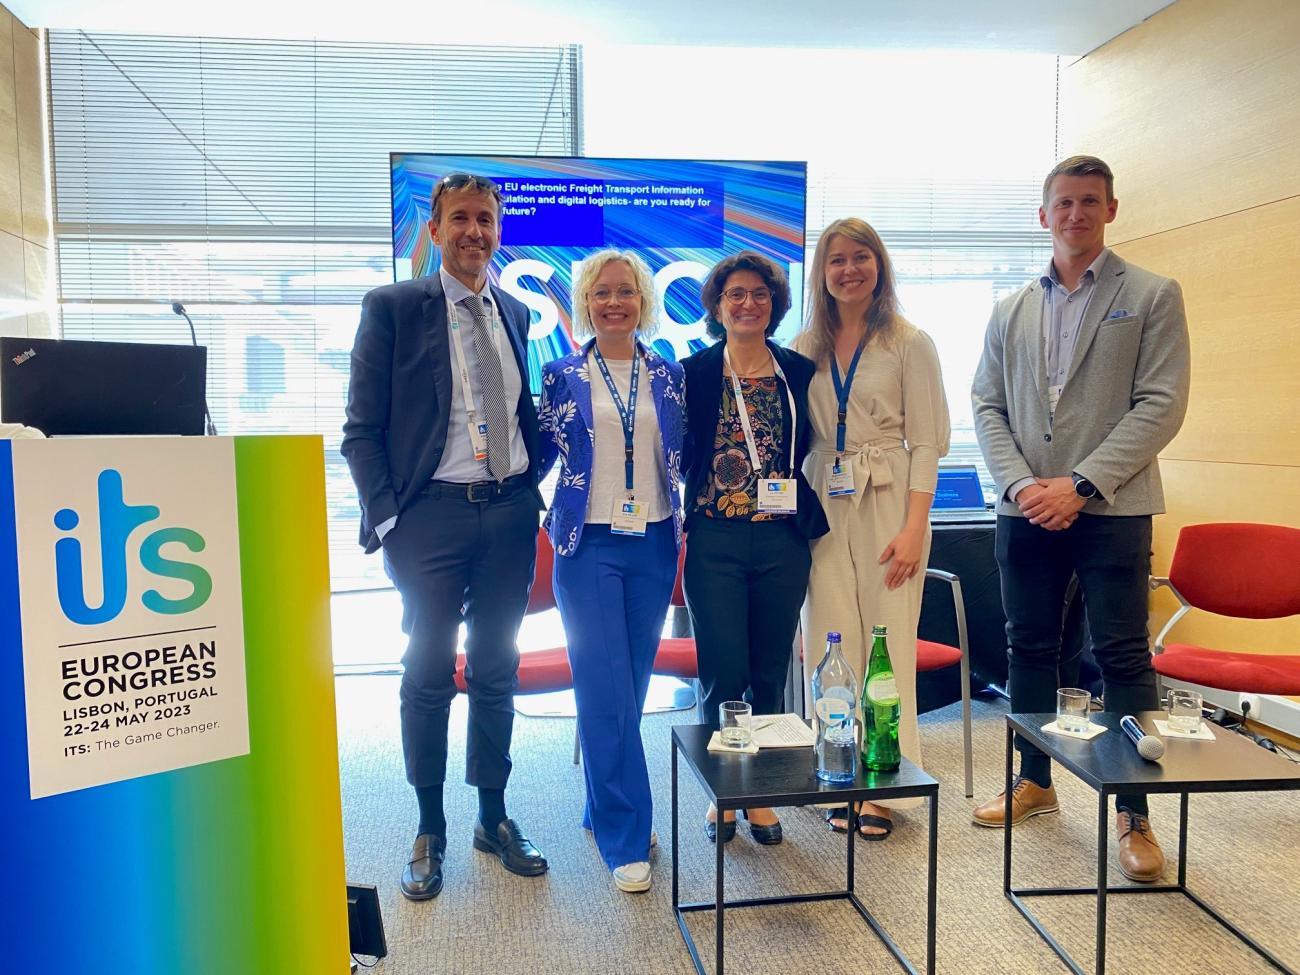 Estonian delegation attended the ITS Congress in Lisbon